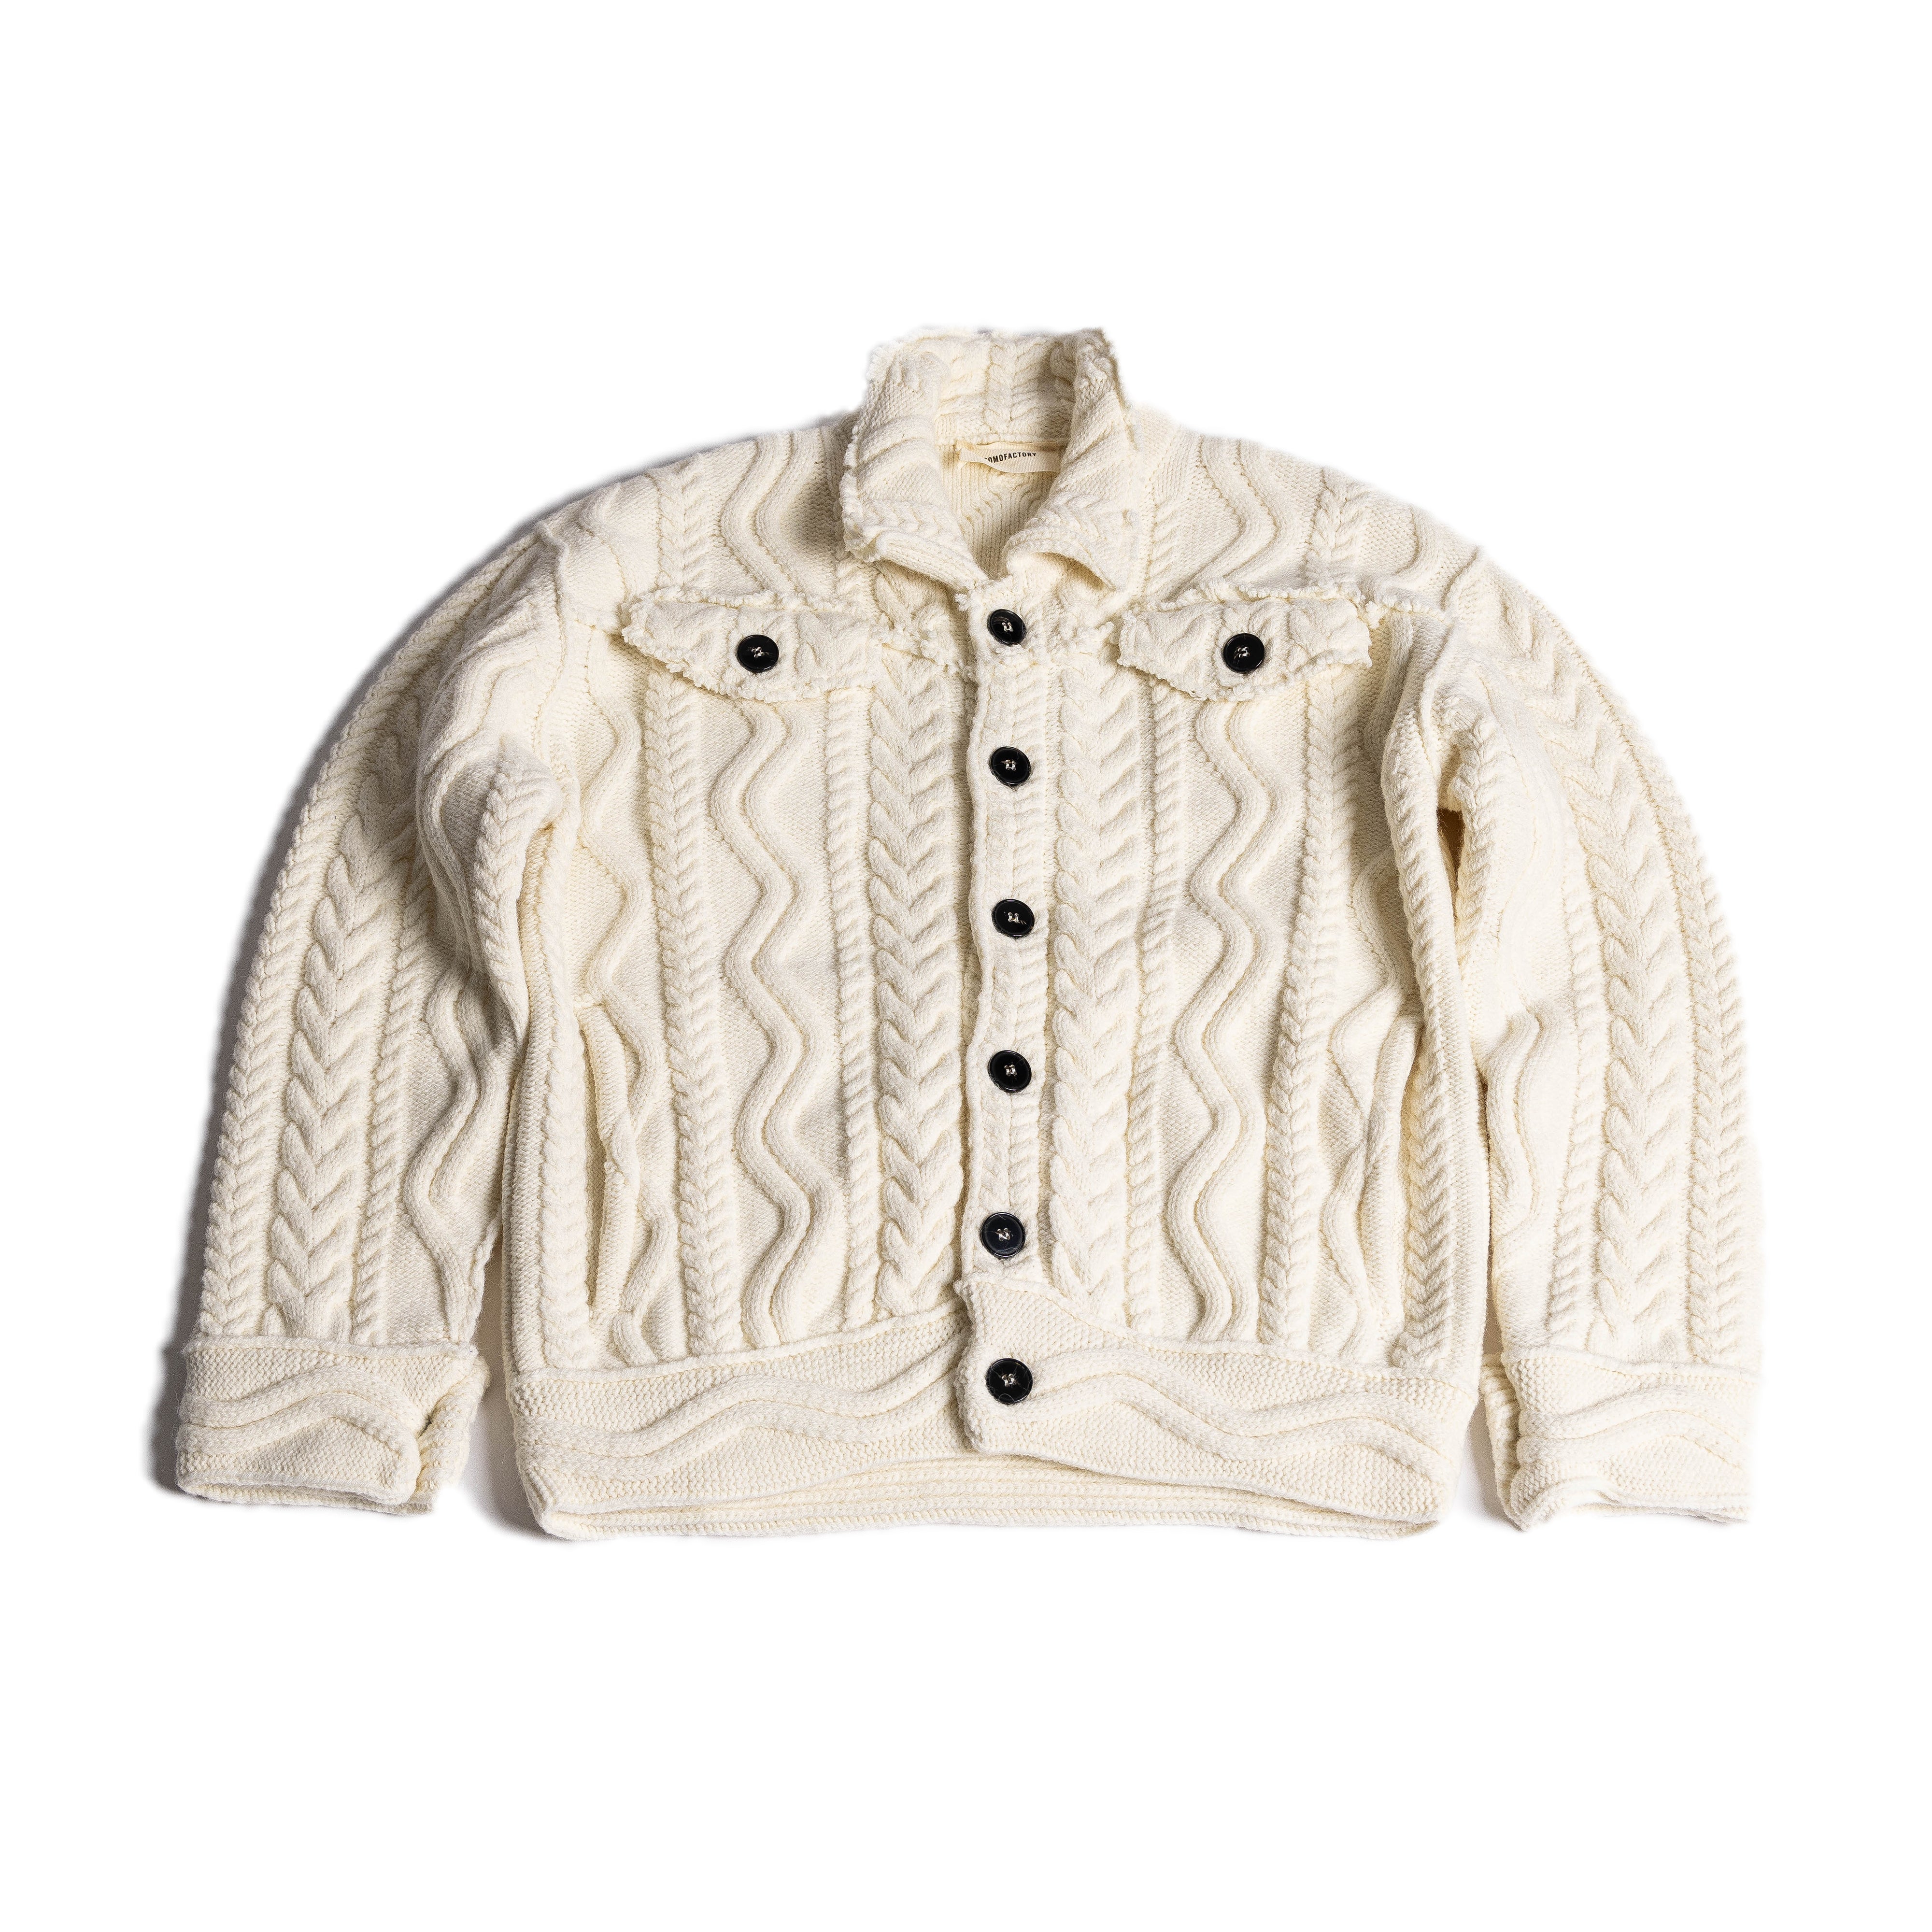 Atomo Knit Button-up Sweater